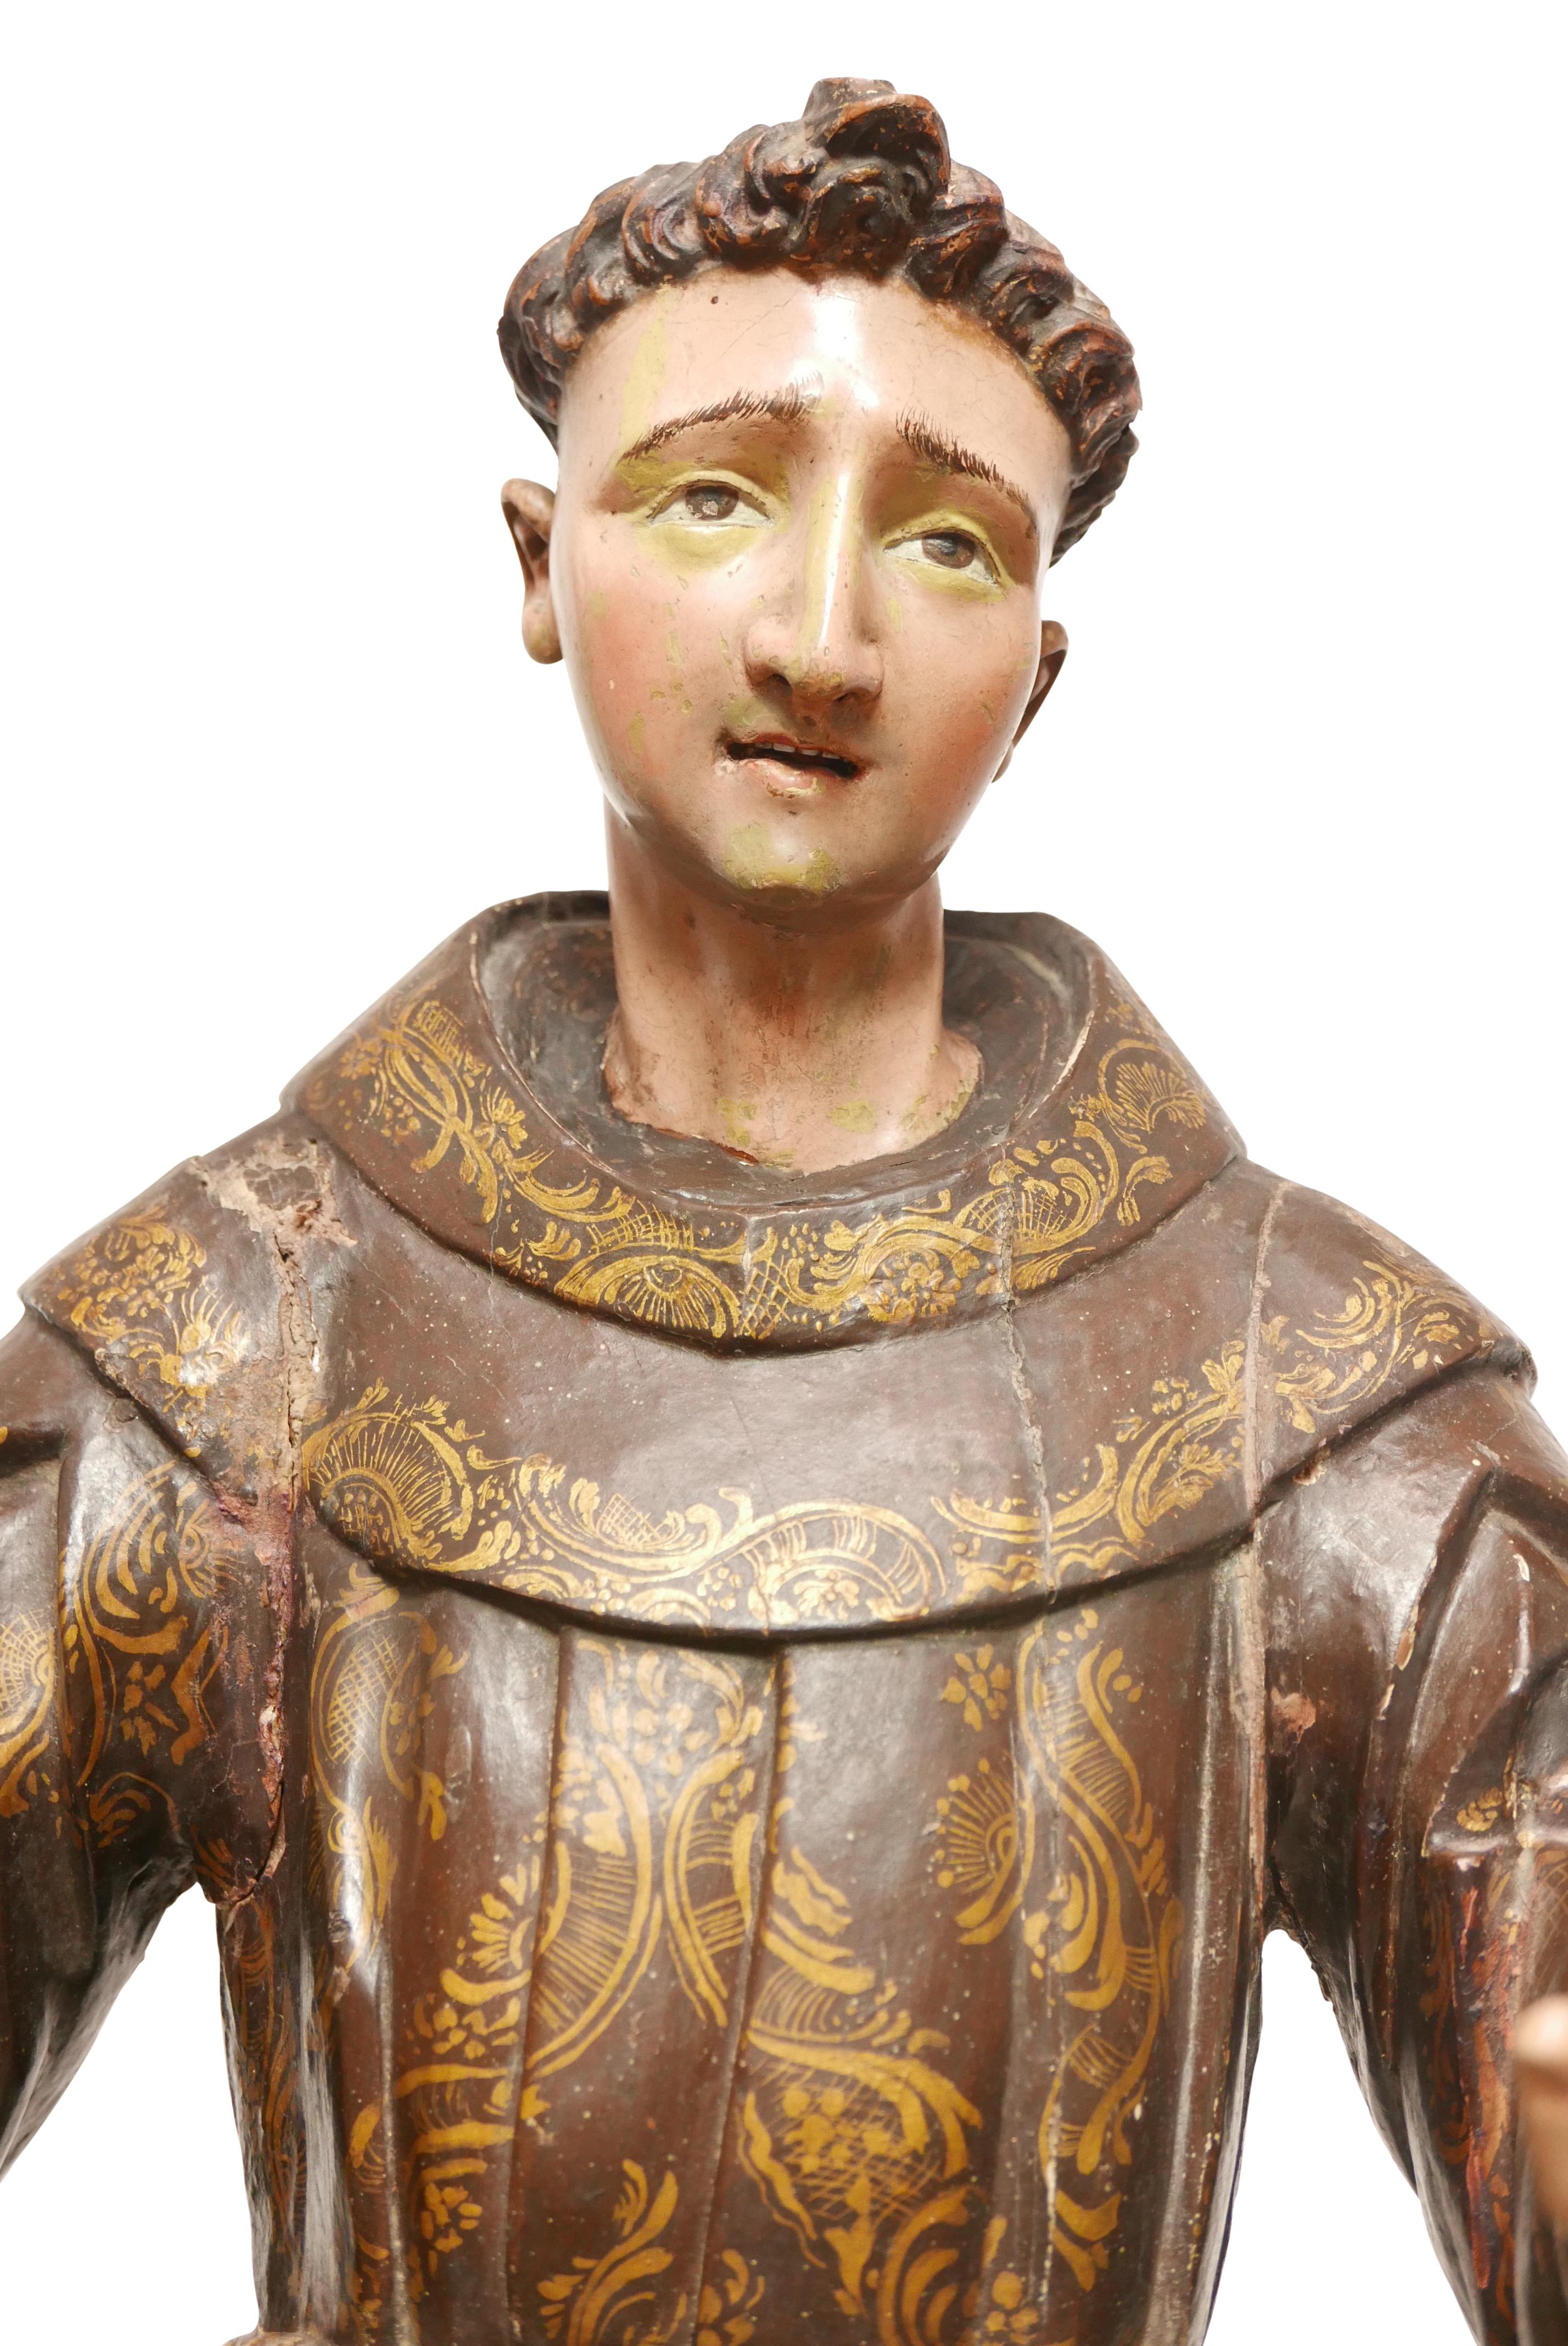 A very large and impressive statue of St Francis. Carved wood, gessoed, and painted with gilt decoration.
In extraordinary condition with original paint.
Possibly Mexican, 18th century.